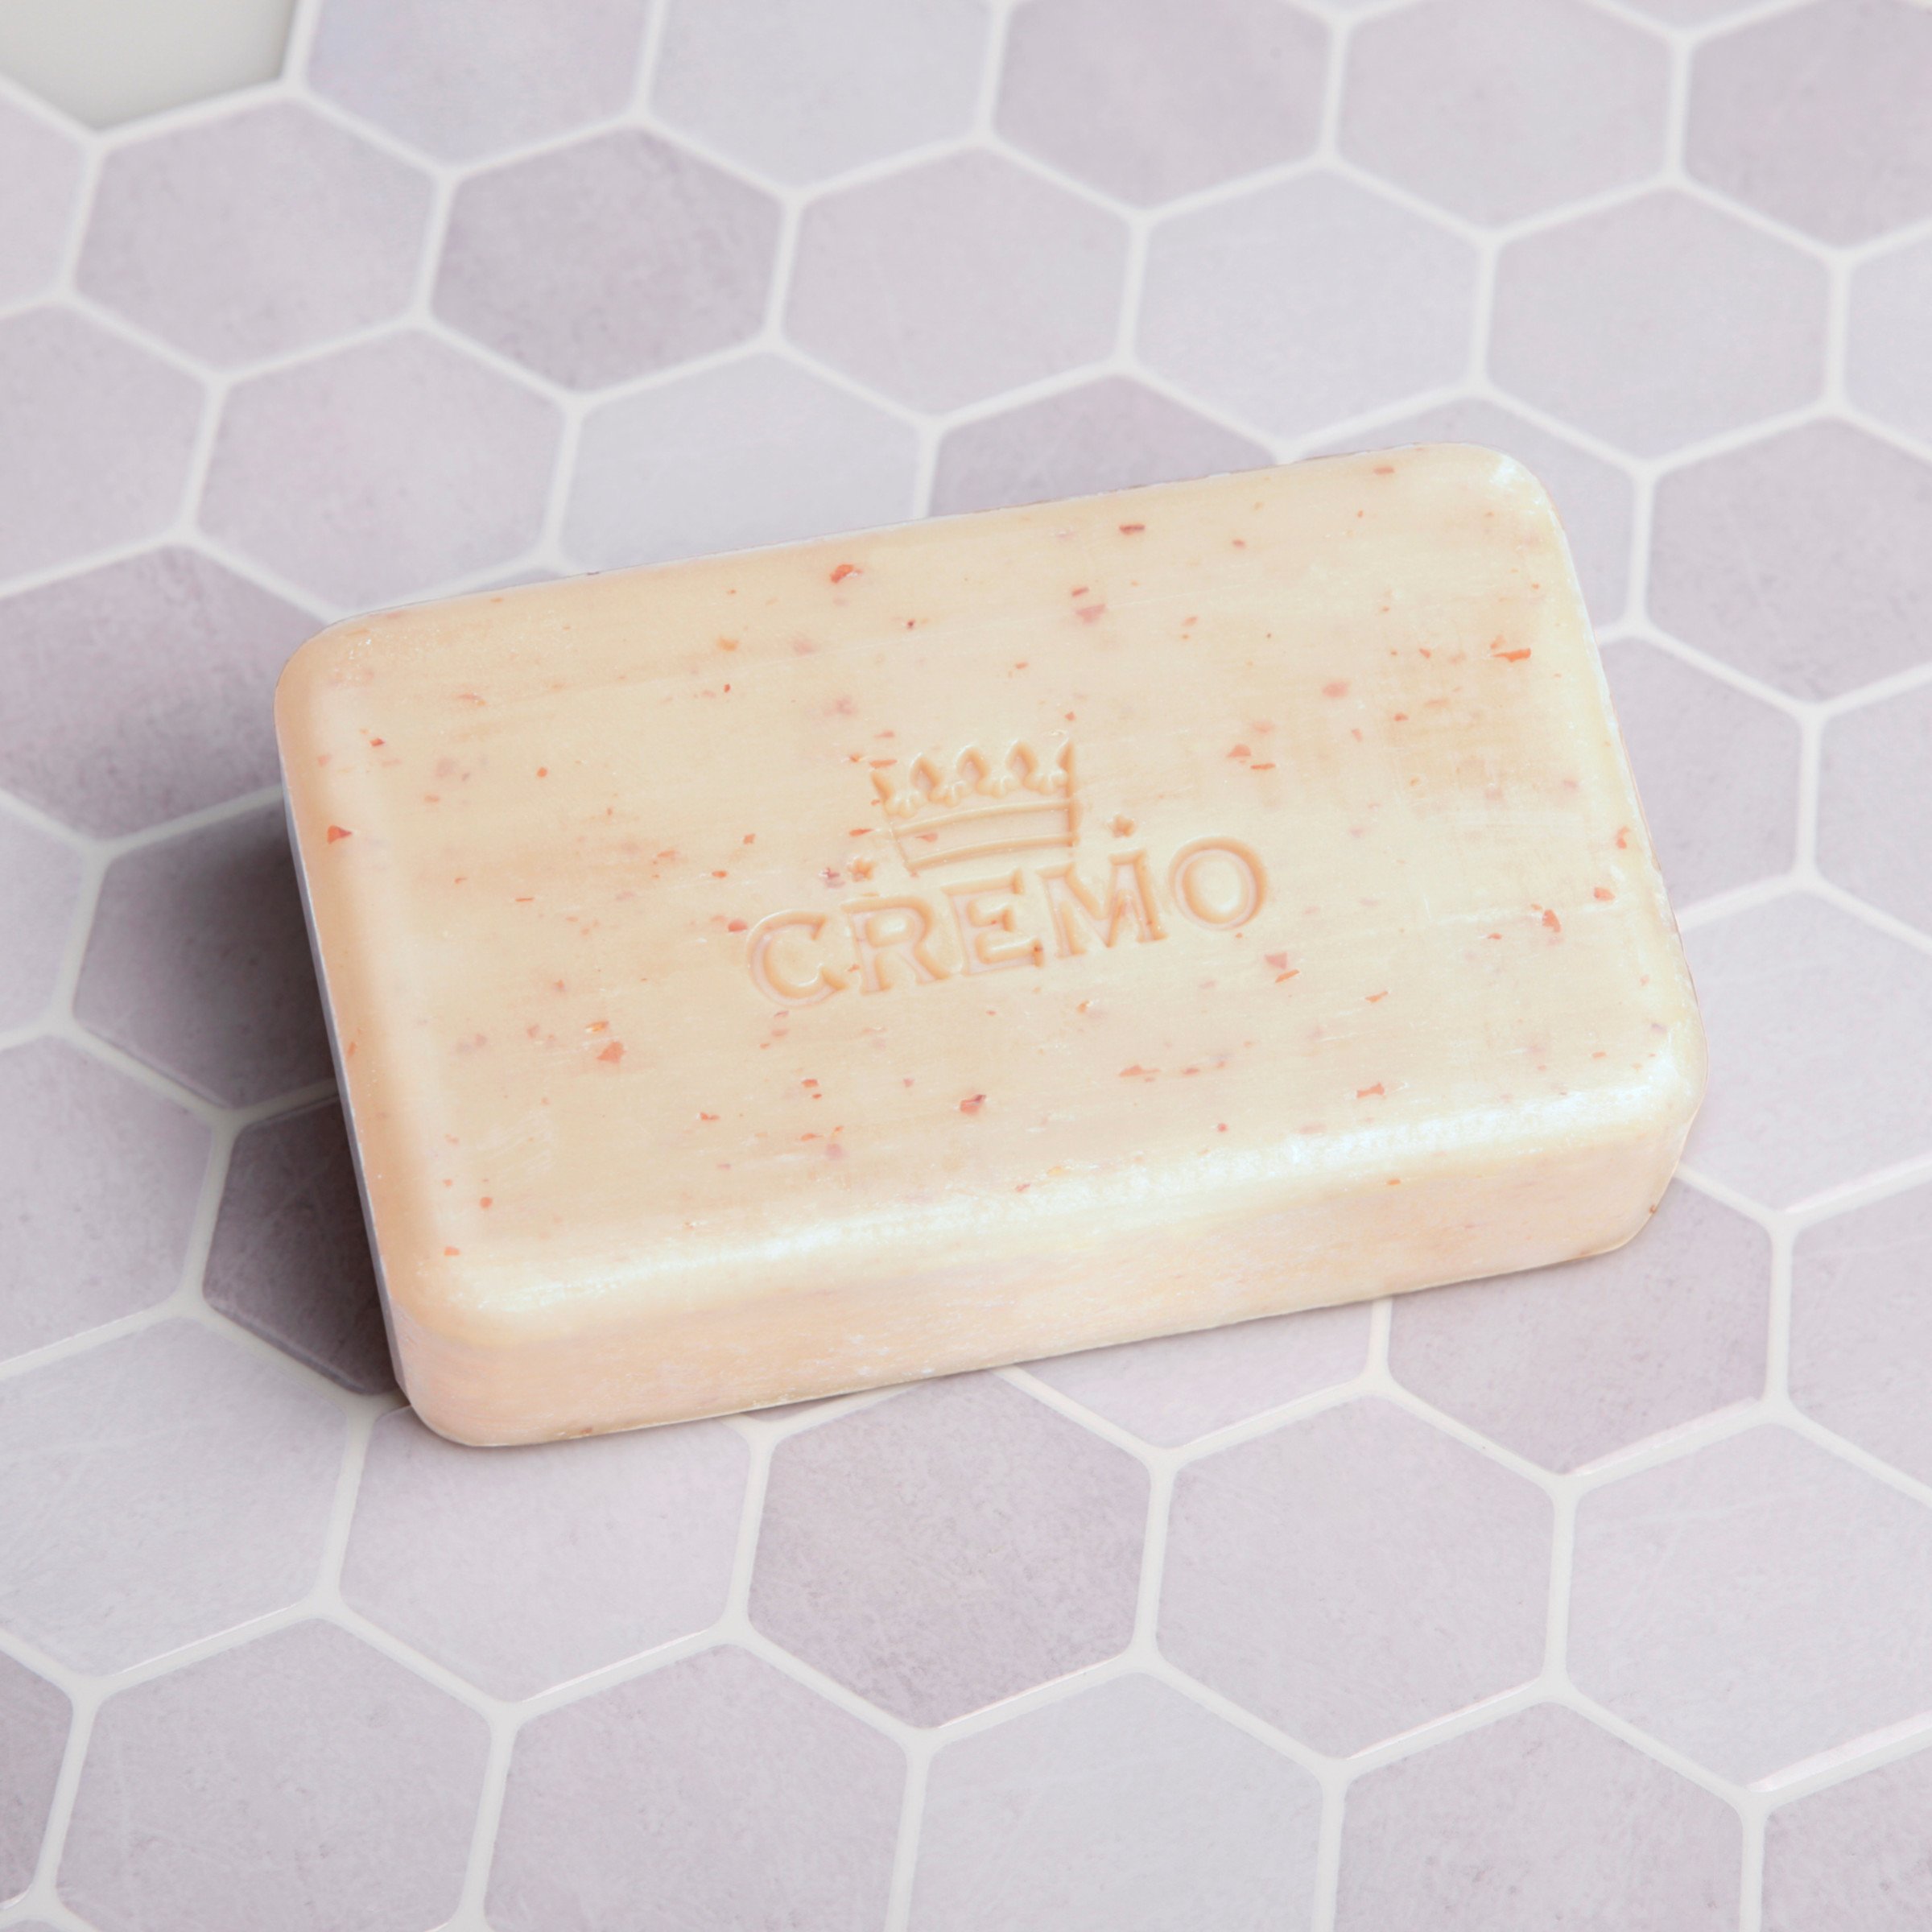  Cremo Exfoliating Body Bars Palo Santo (Reserve Collection) -  A Combination of Lava Rock and Oat Kernel Gently Polishes While Shea Butter  Leaves Your Skin Feeling Smooth and Healthy (Pack